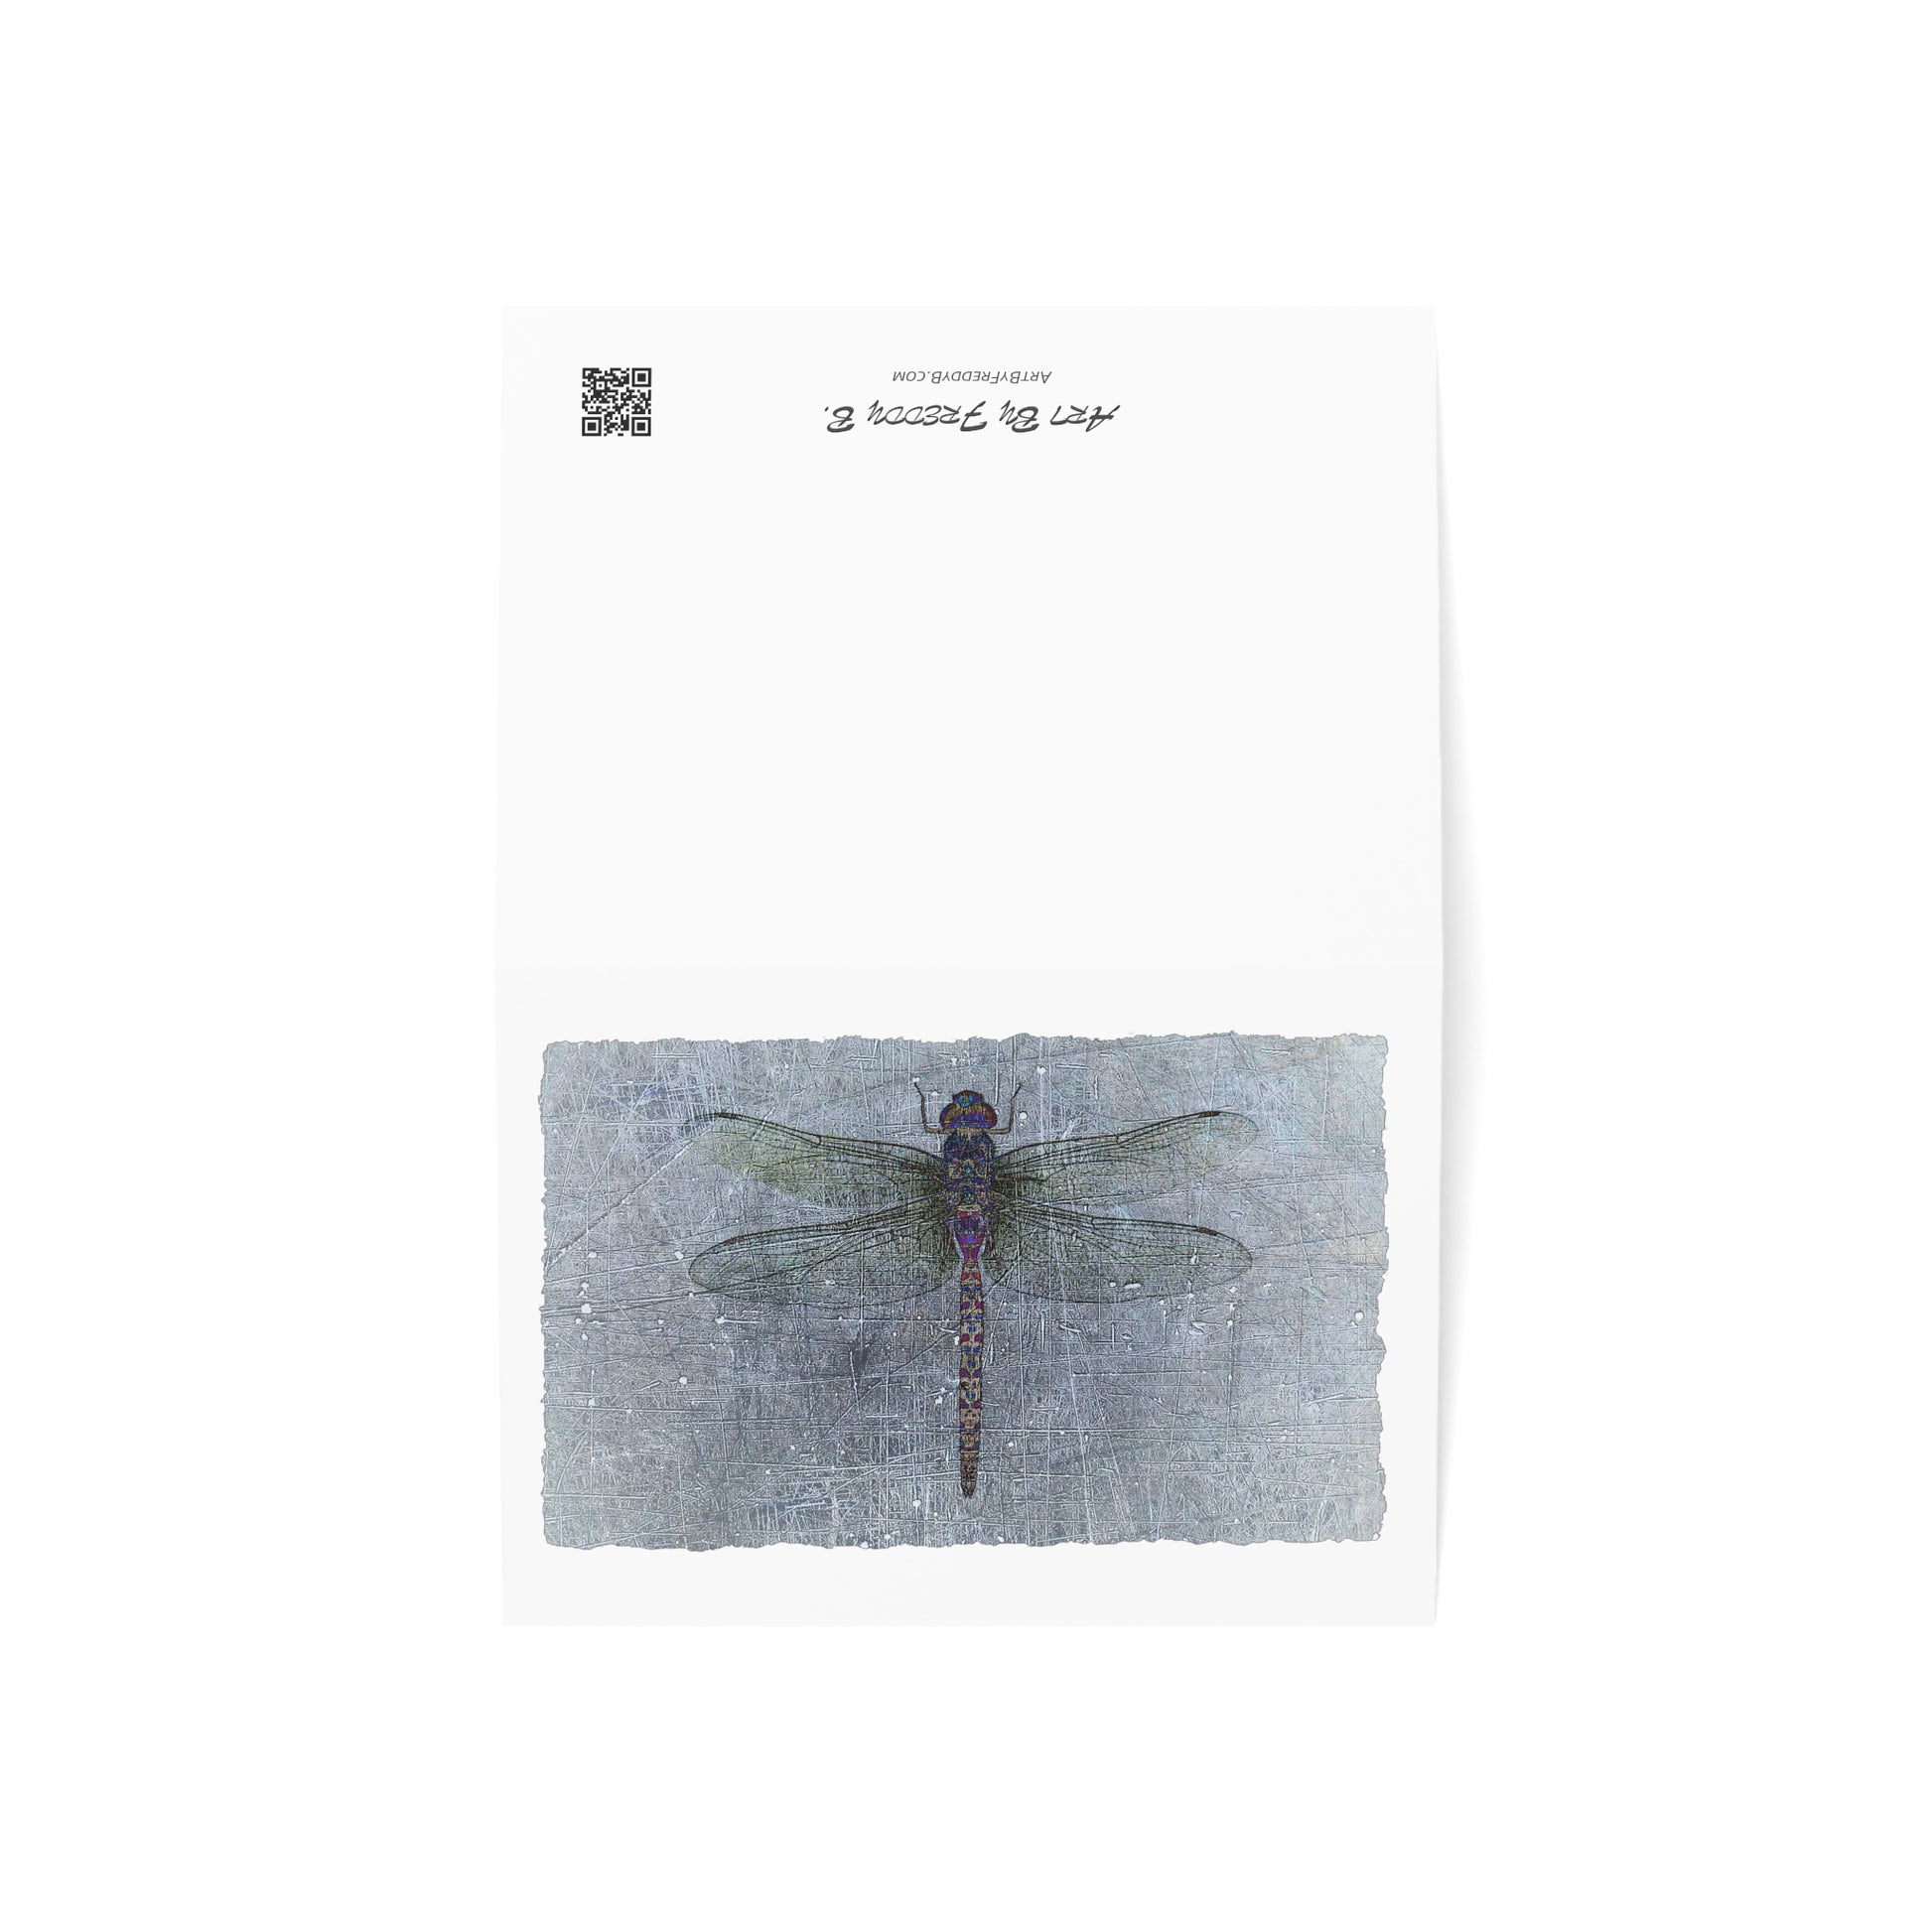 Dragonfly Print Greeting Cards Blue Gray Dragonflies Stationery and Blank Cards top view